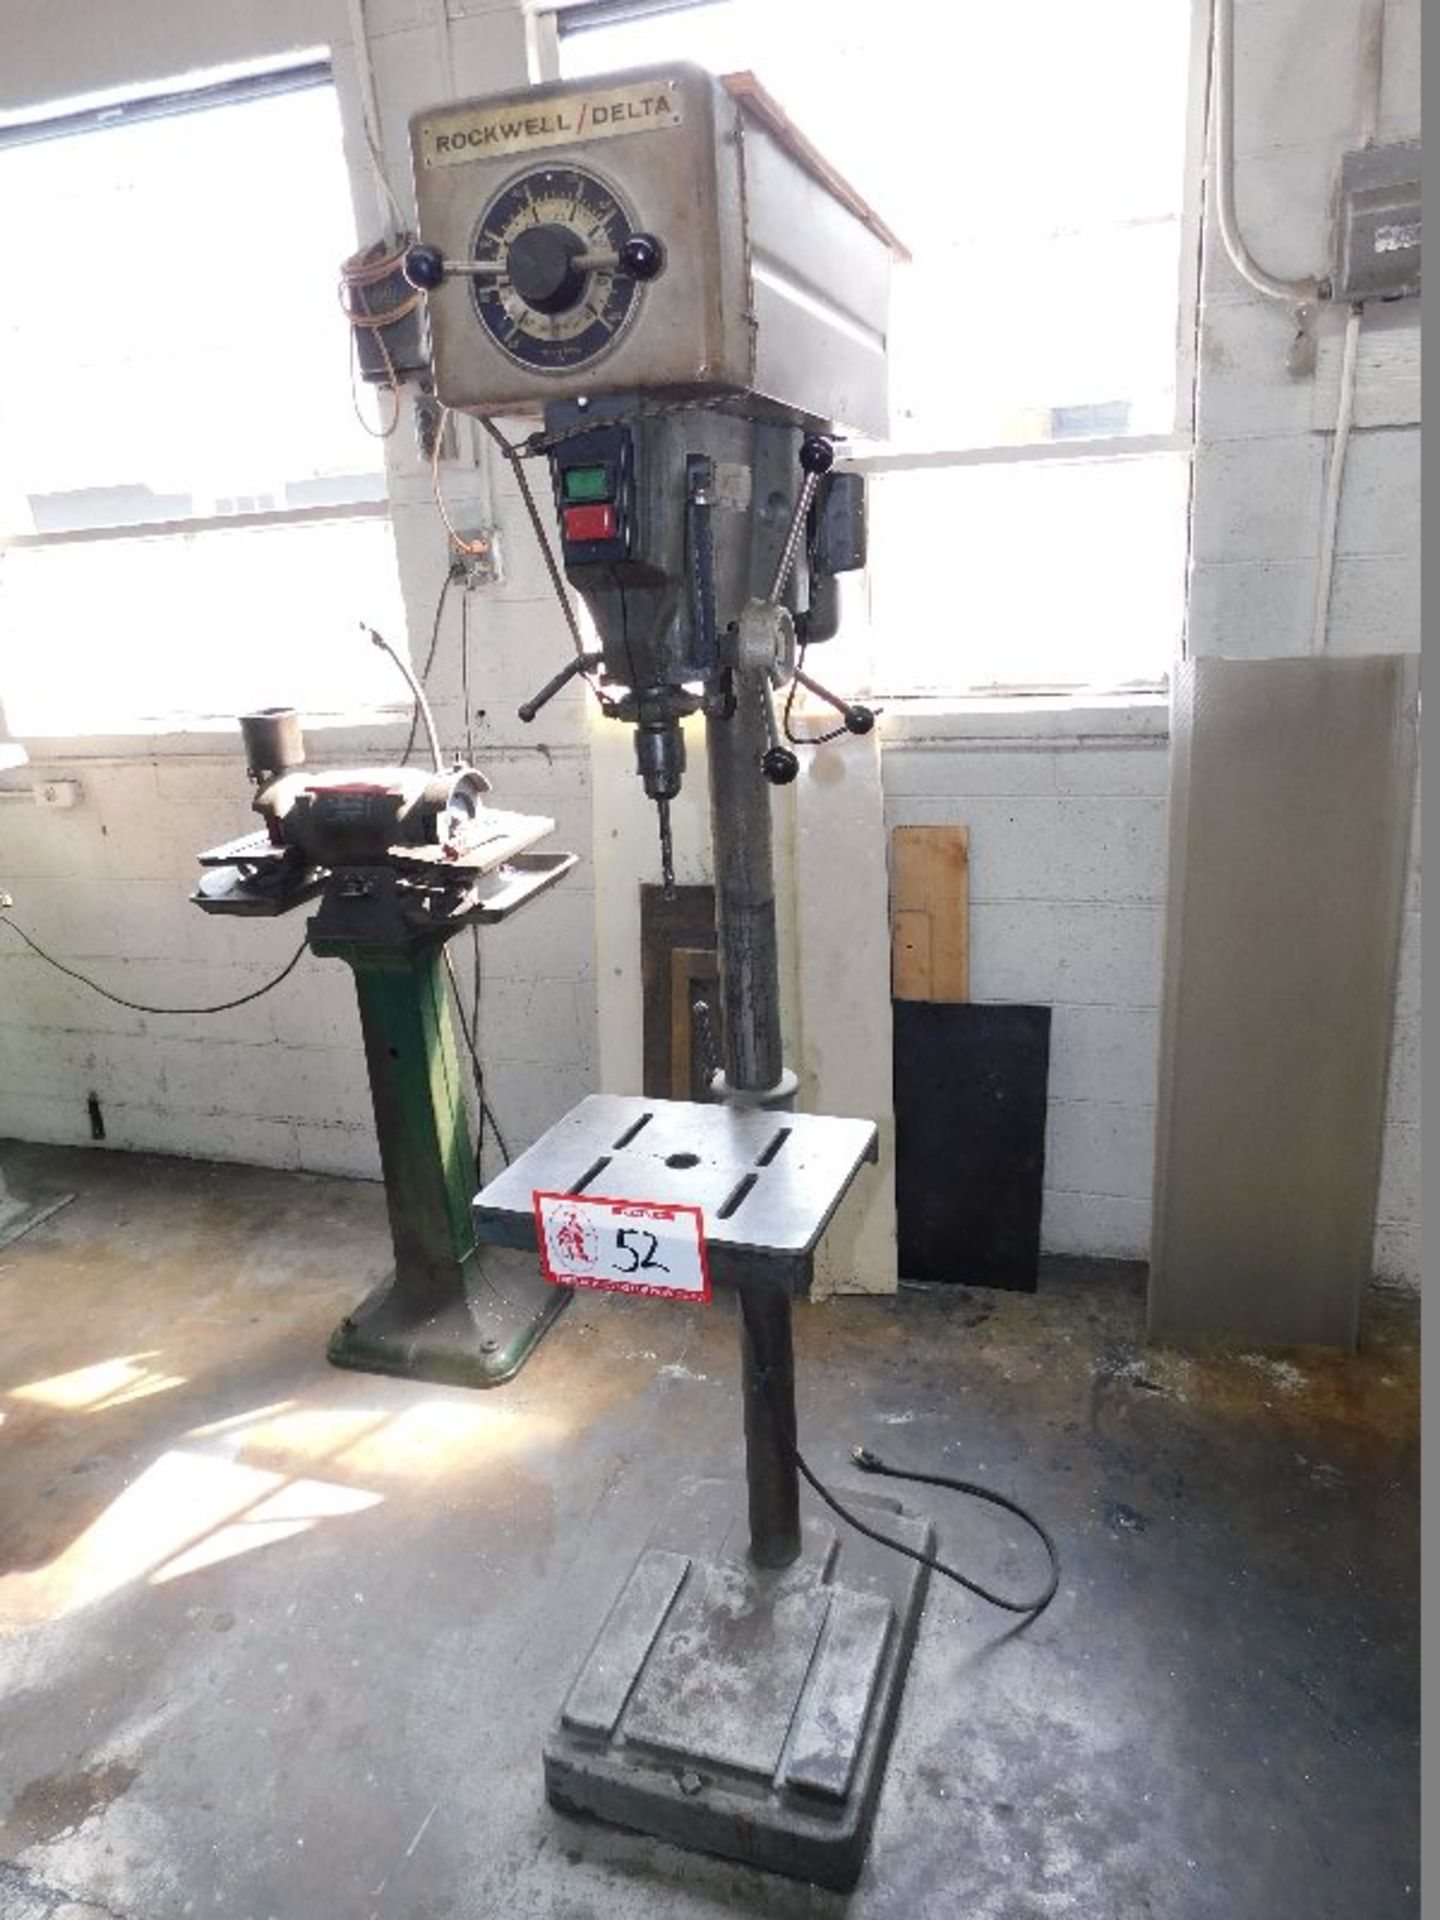 Rockwell Series 15-855 Variable Speed Drill Press